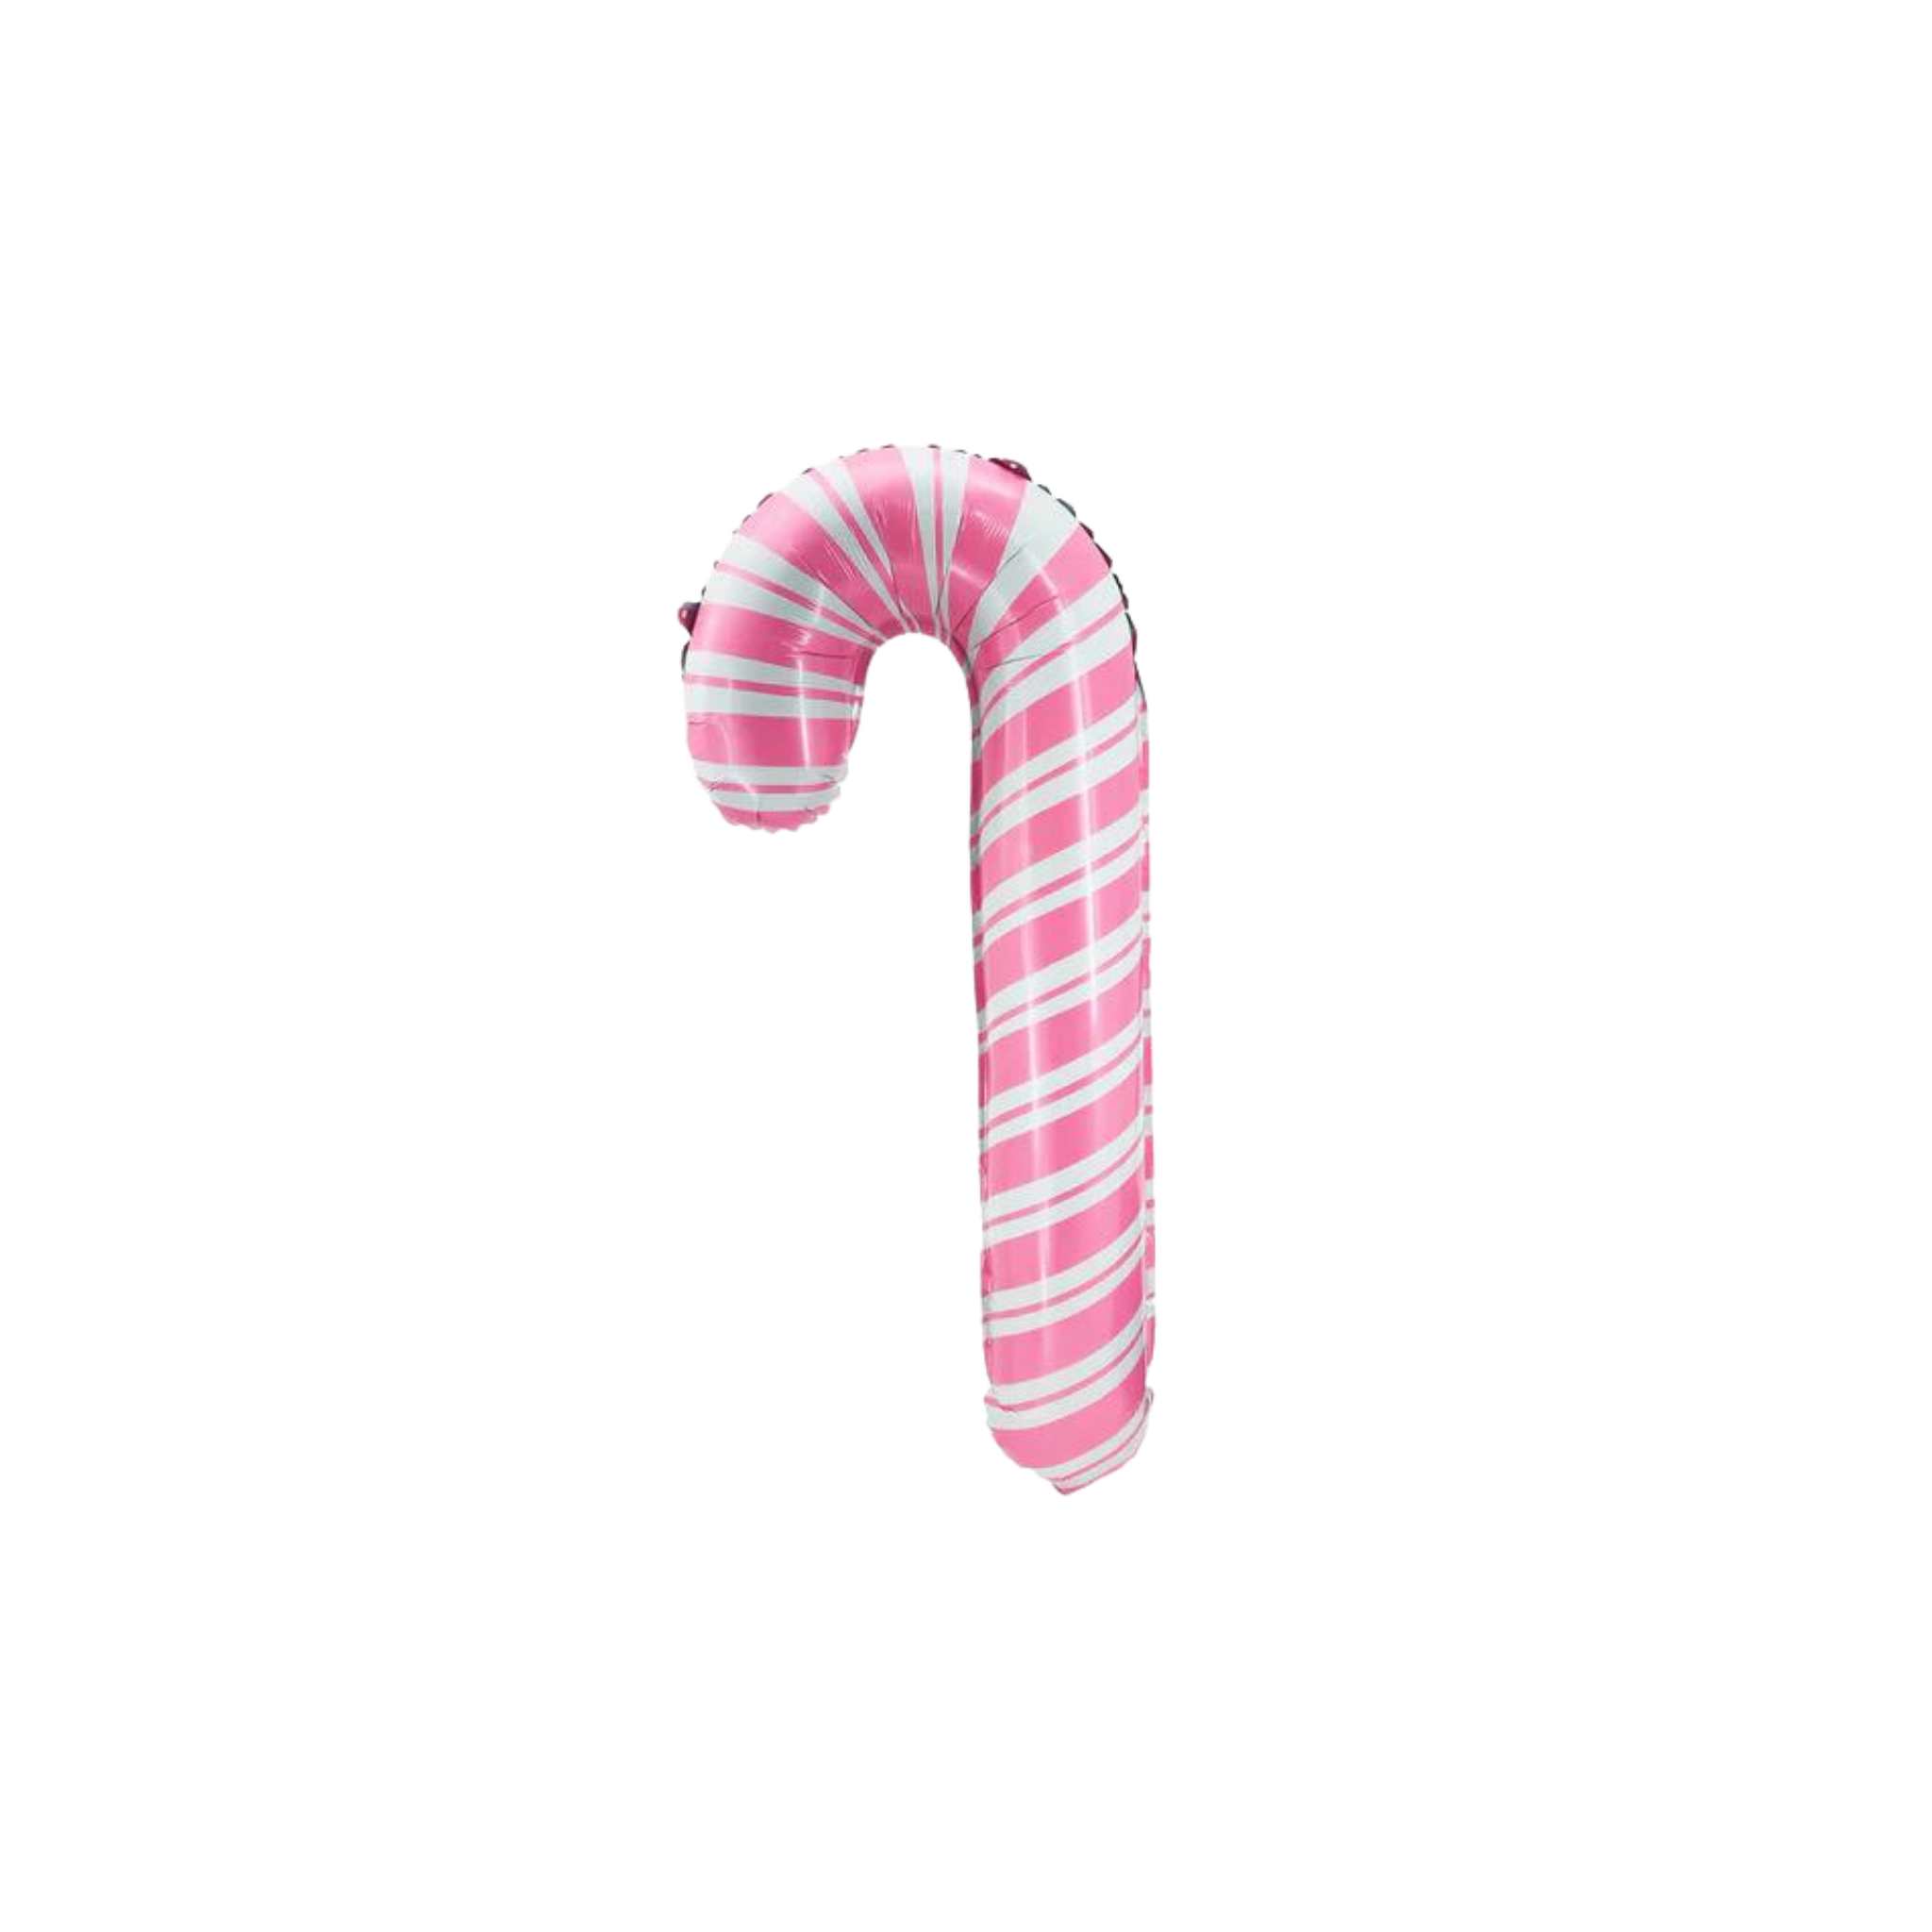 Pink Candy Cane Balloon